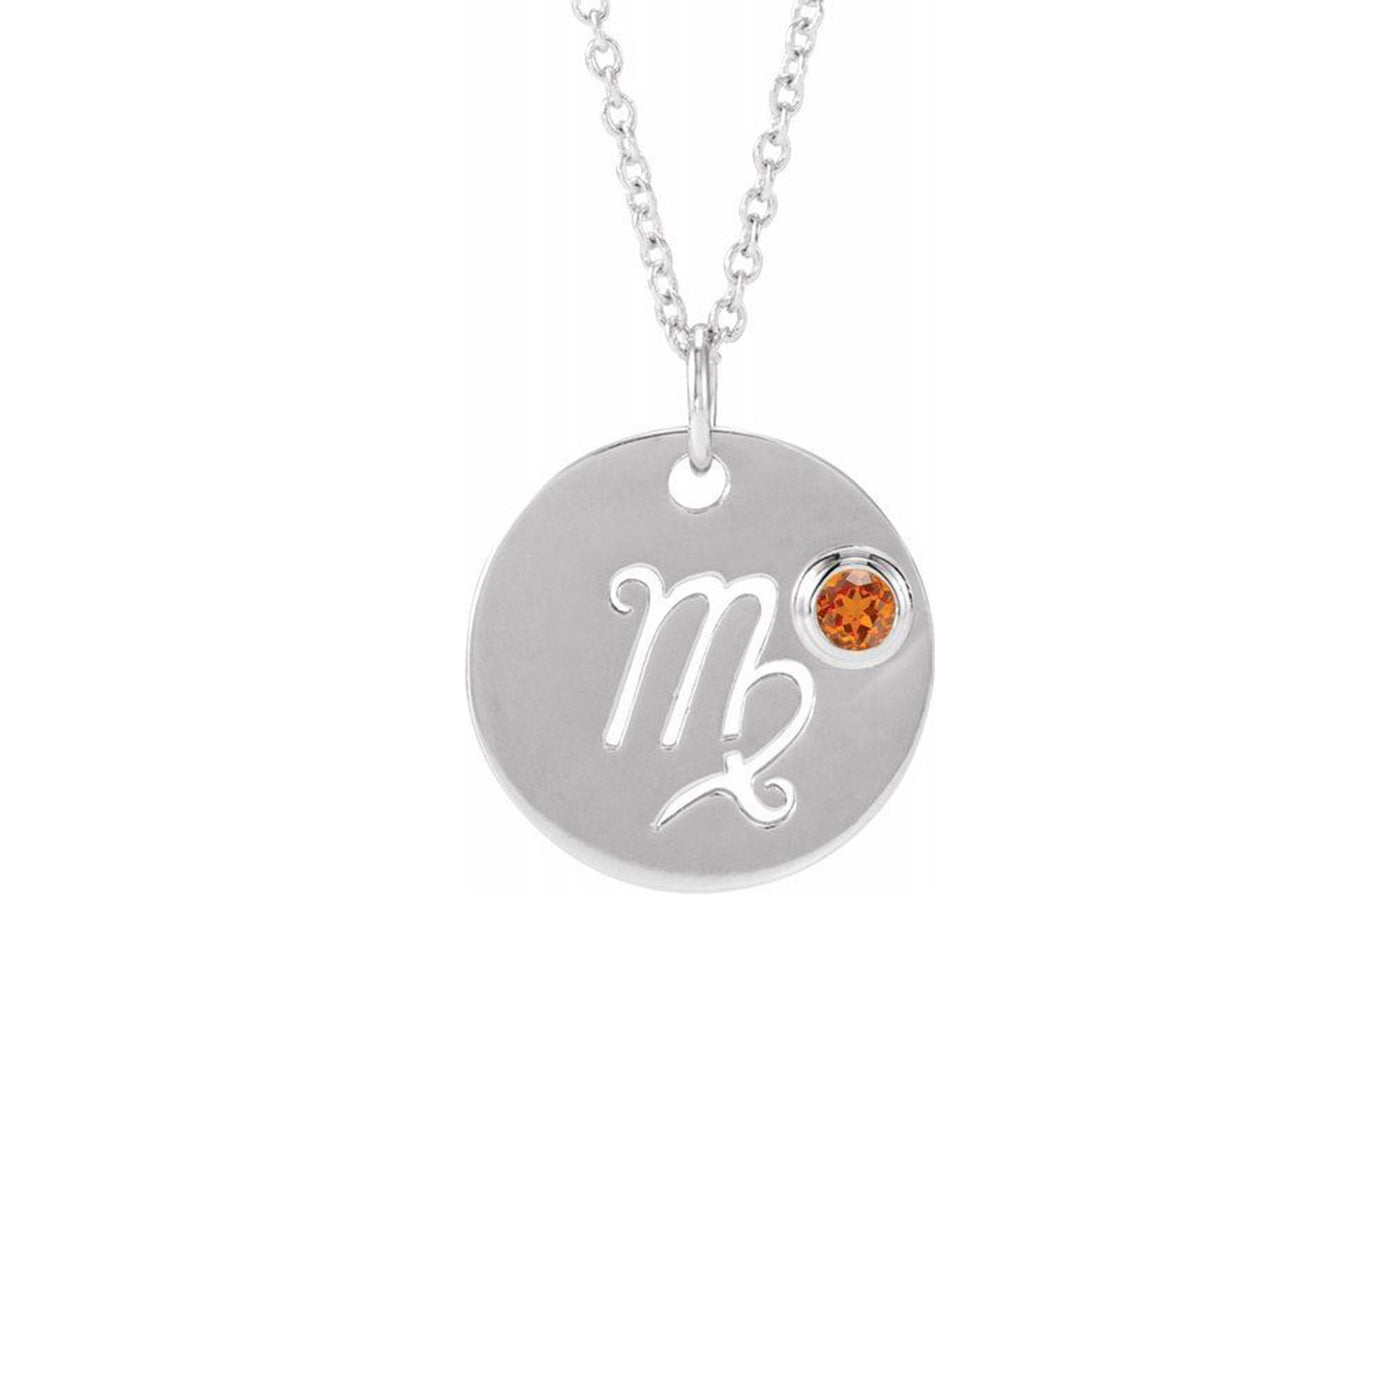 Virgo Zodiac Sign Cut-Out with Gemstone Necklace